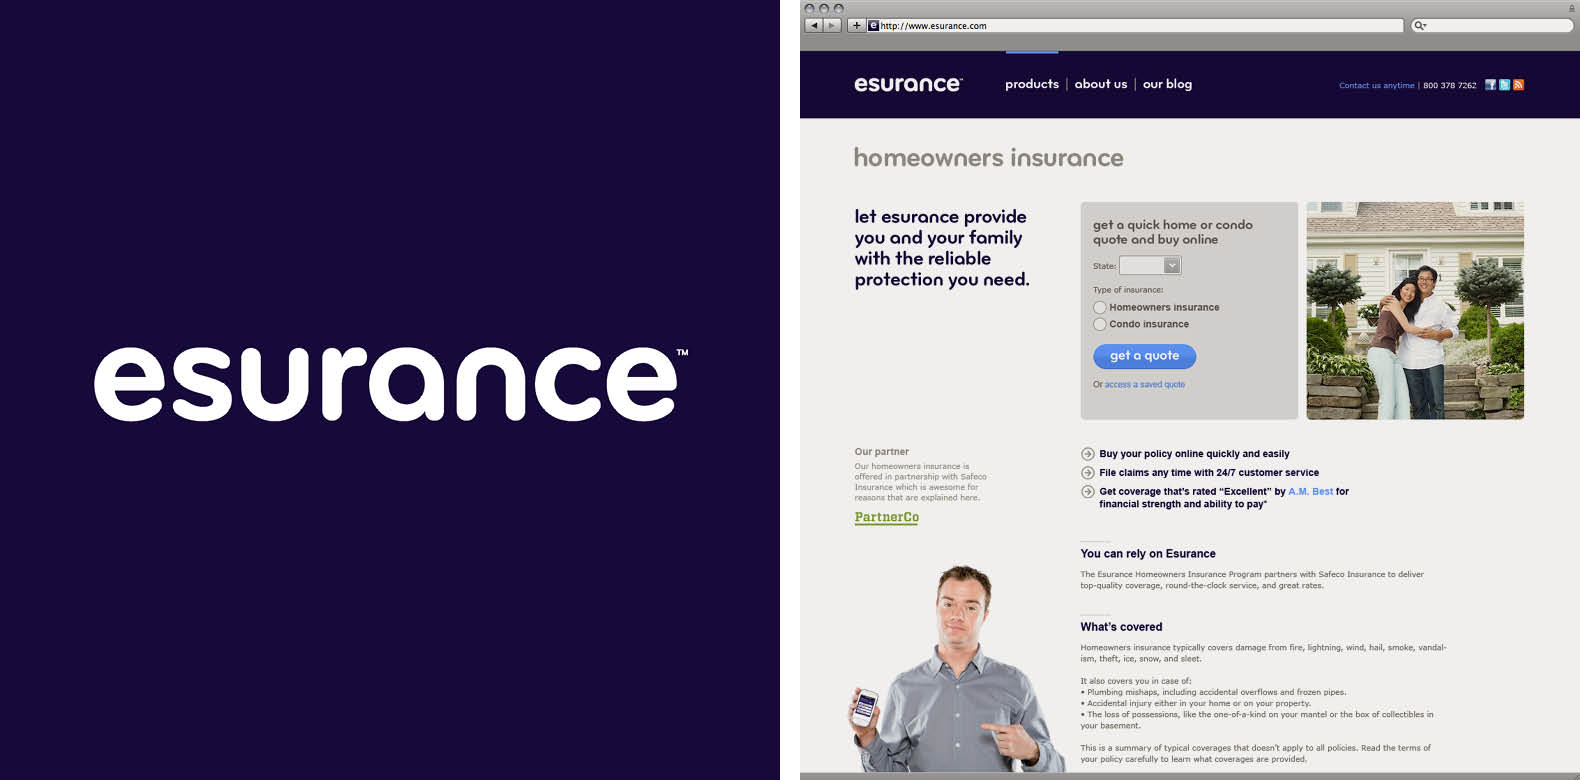 REBRAND 100 redux: this time for Esurance